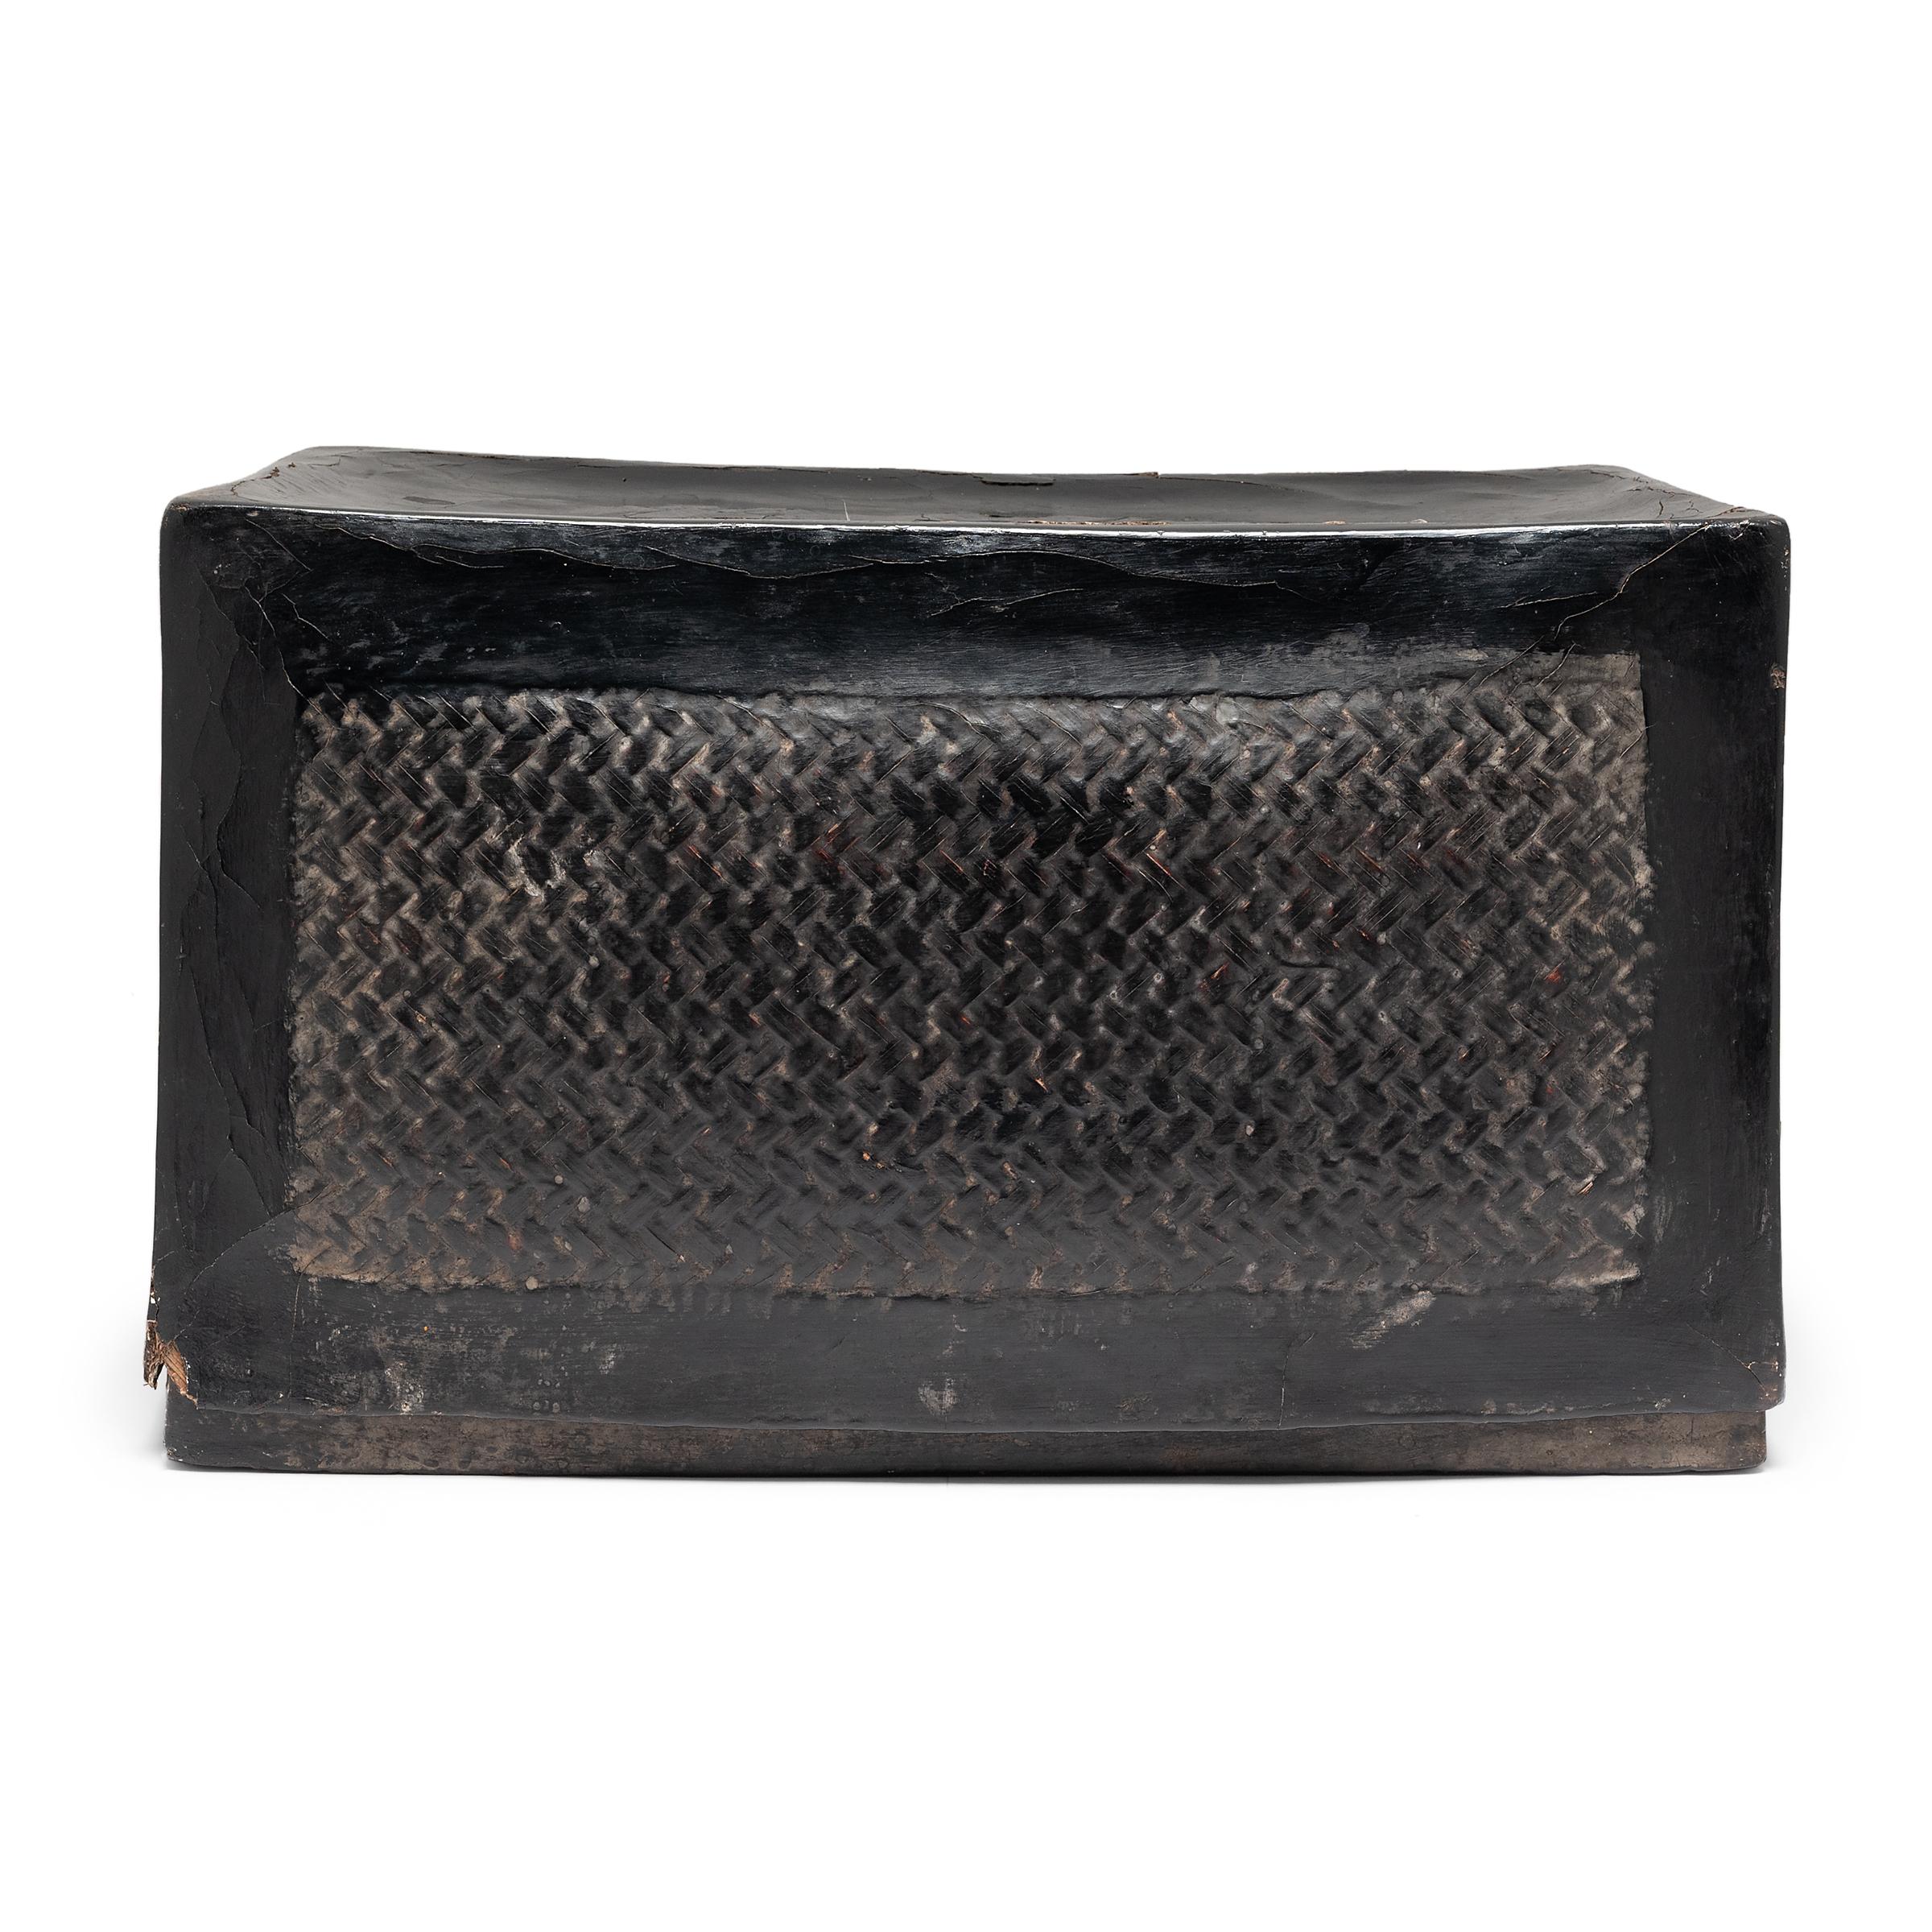 Southeast Asian Chinese Black Lacquer Woven Box, c. 1900